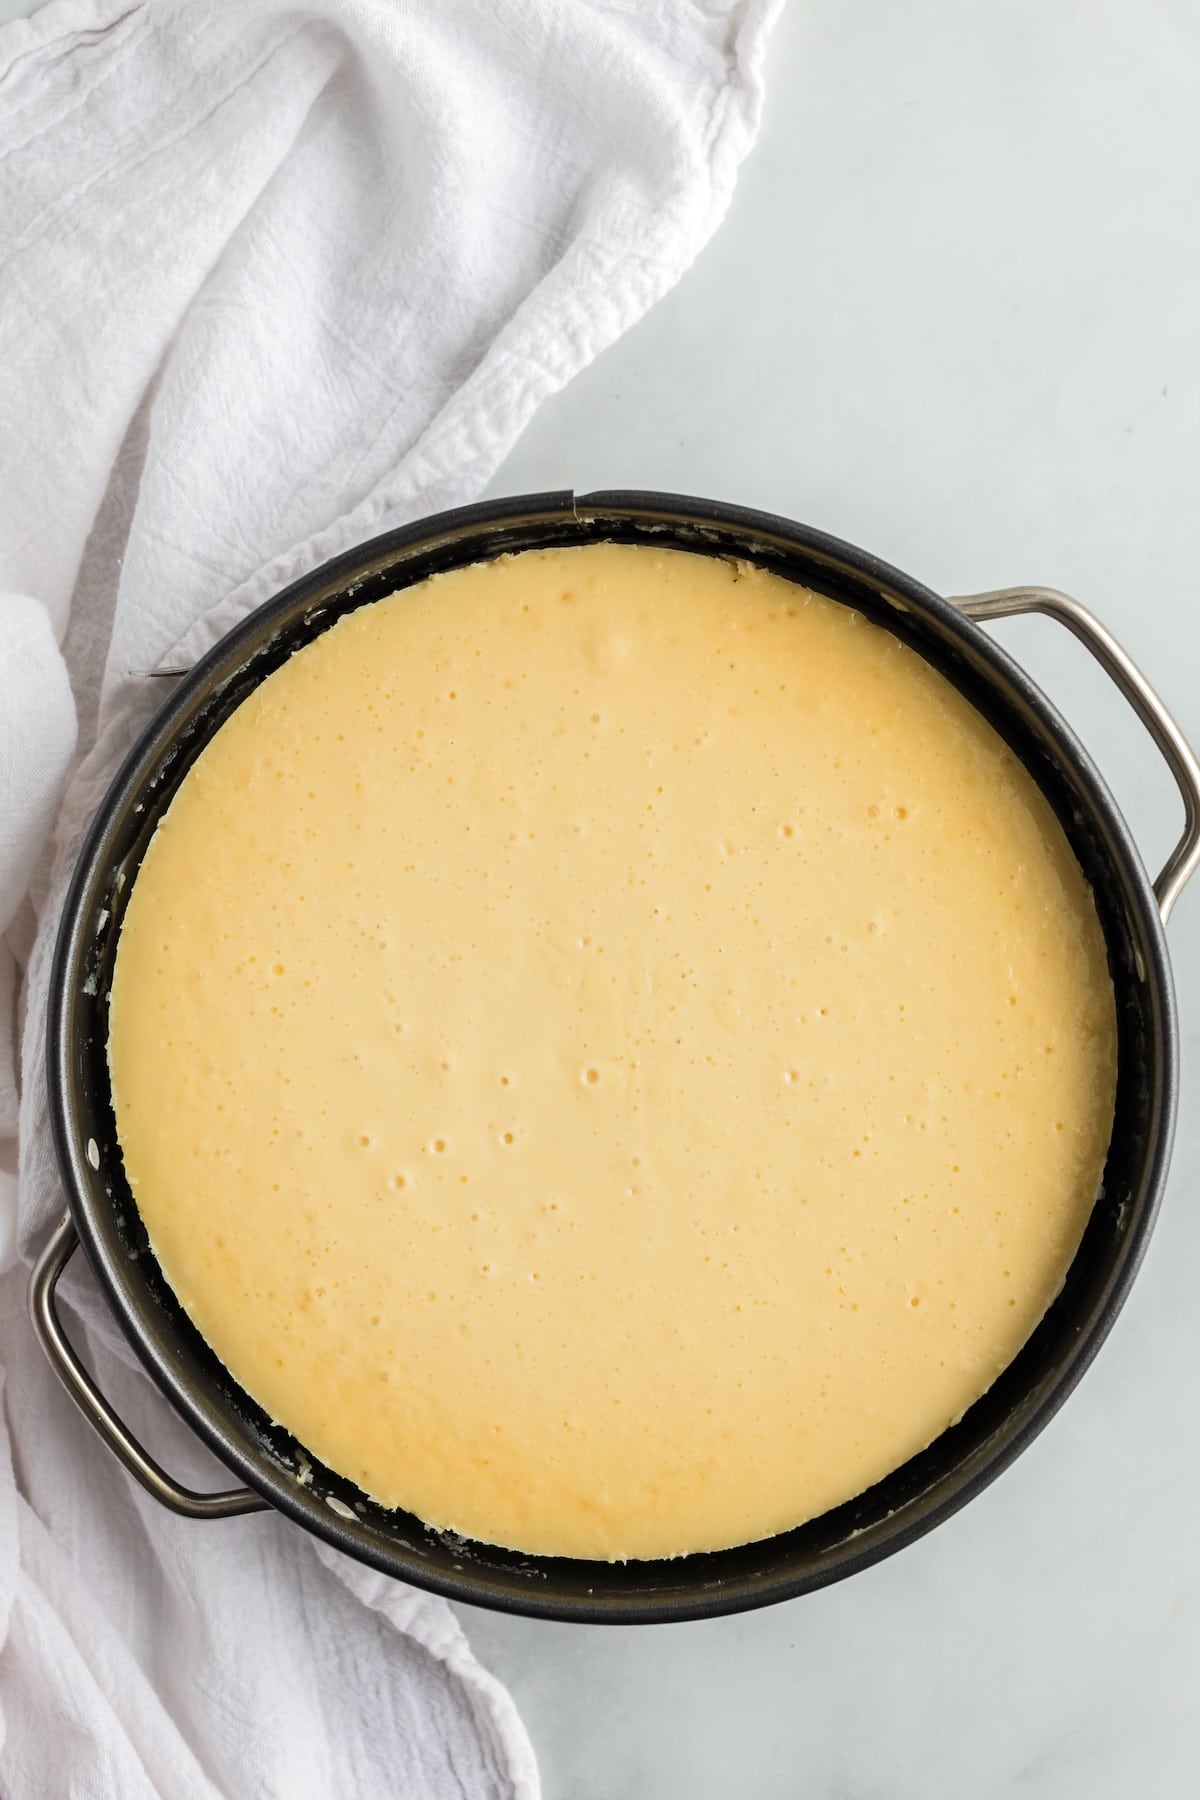 remove the cheesecake from the spring form pan